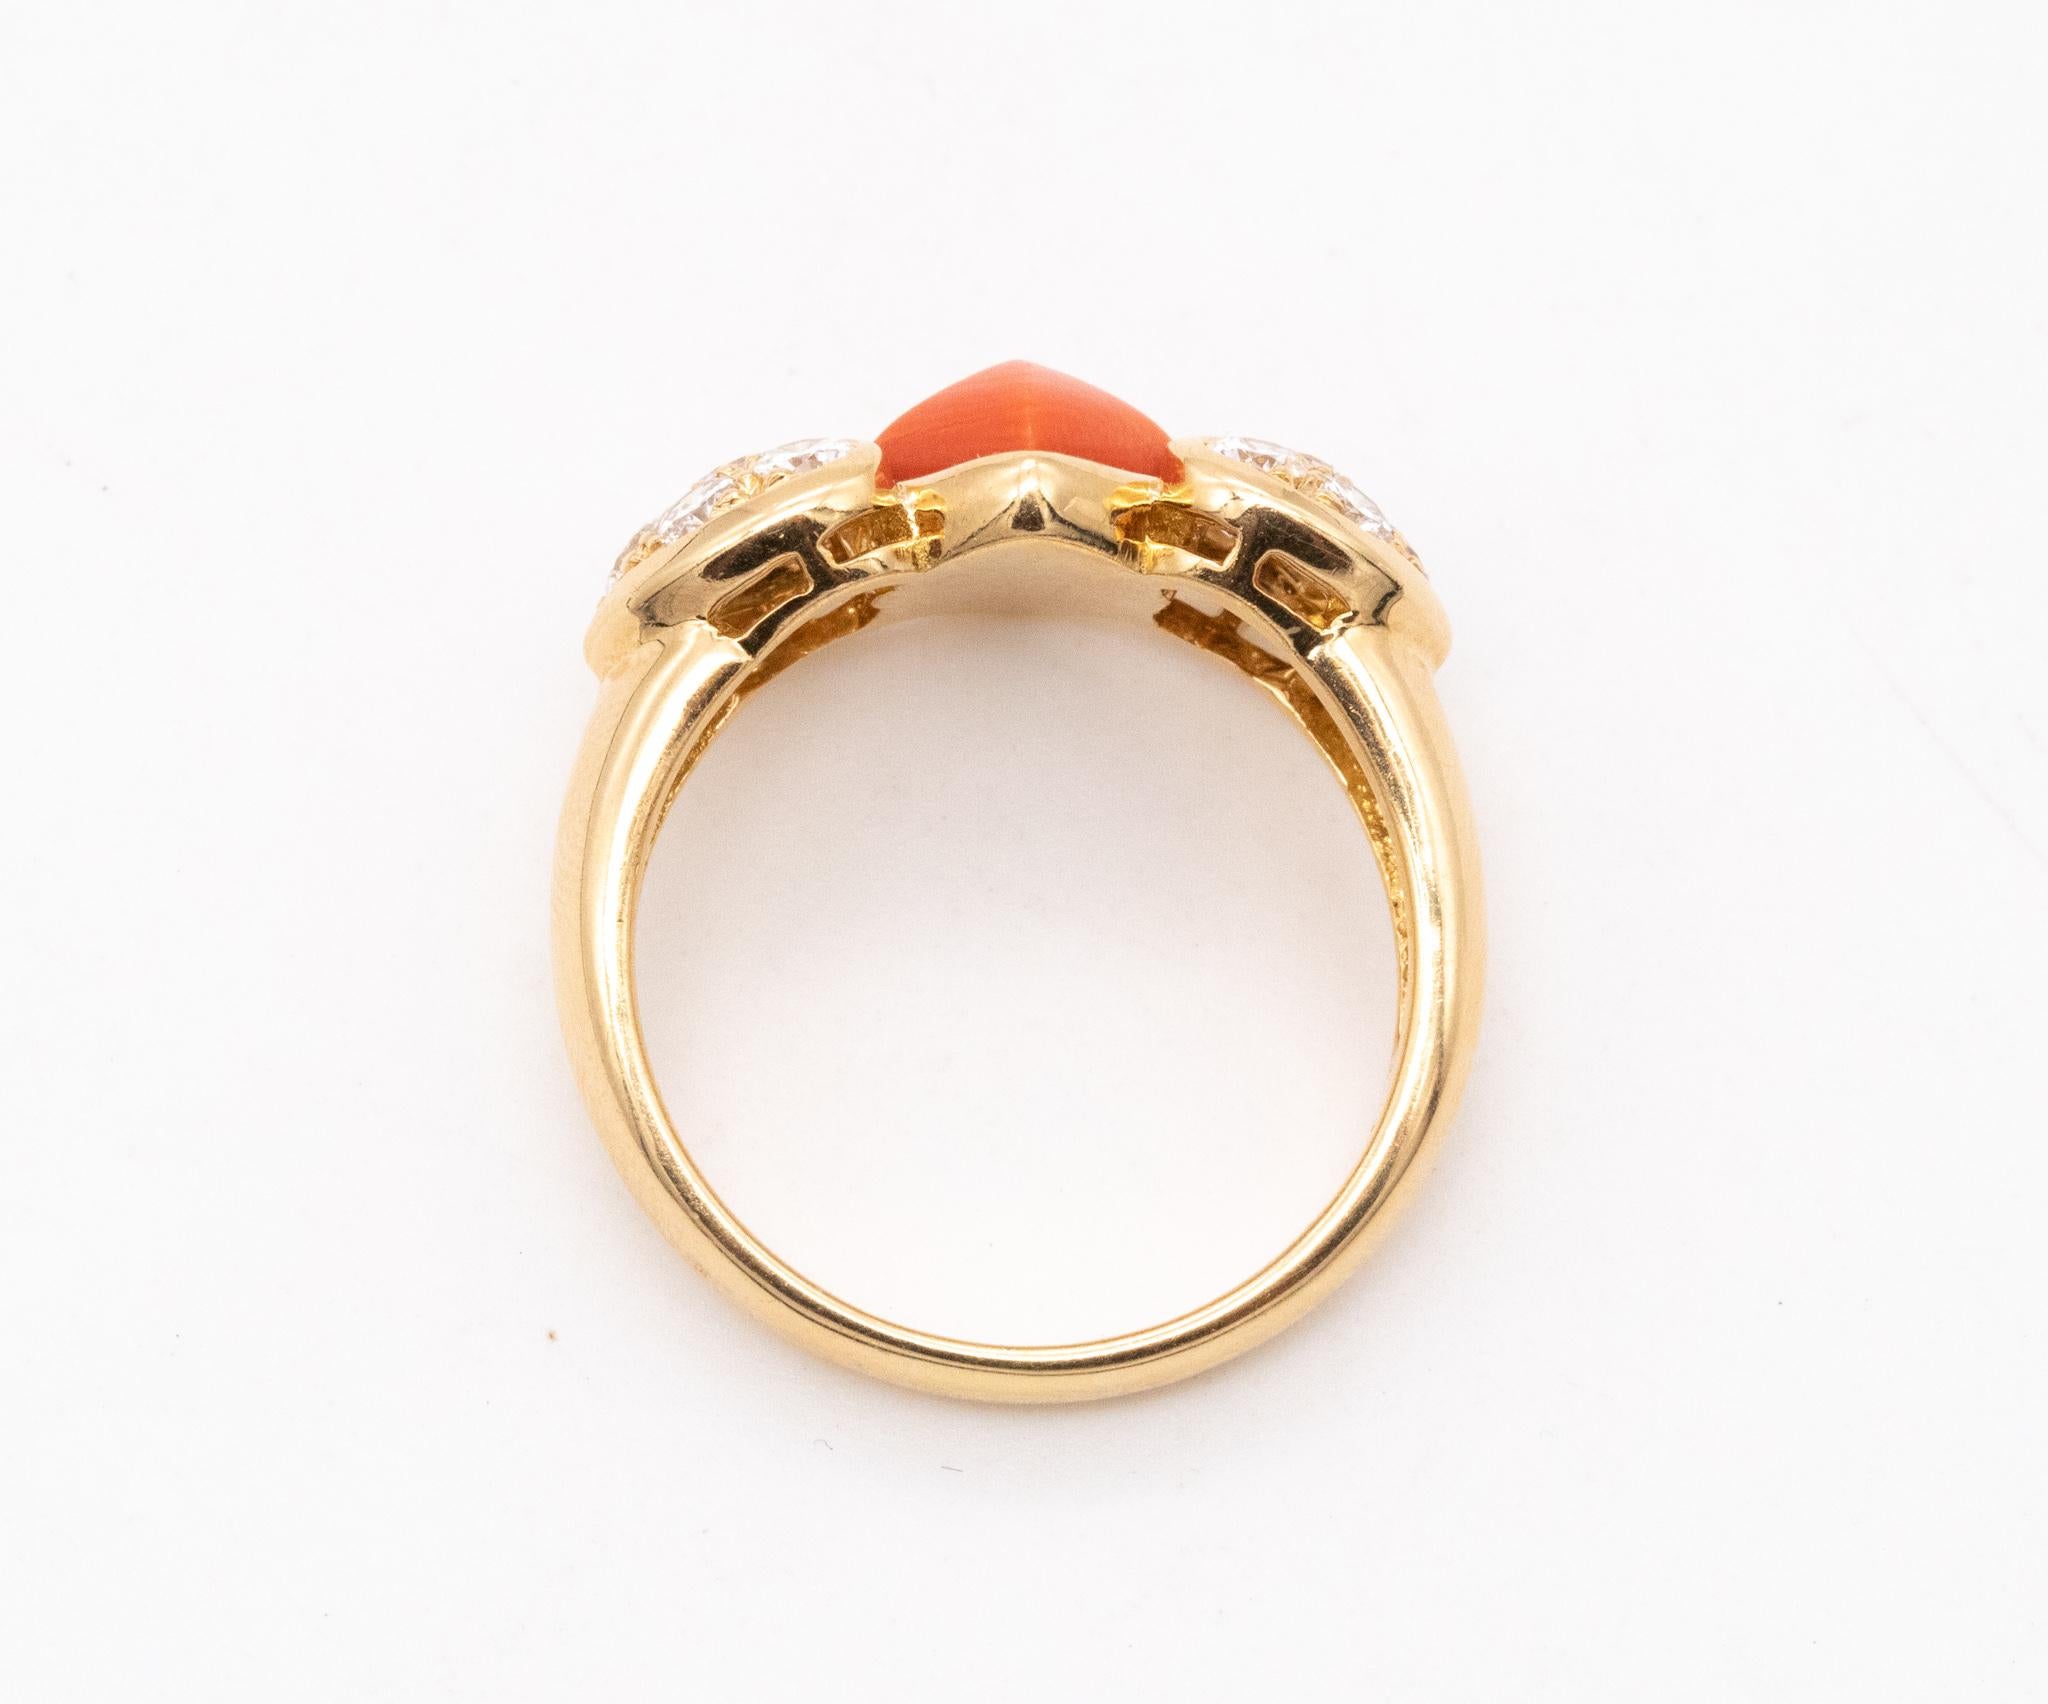 Christian Dior 1970 Paris Ring 18 Karats Gold with 1.96 Ctw Diamonds and Coral In Excellent Condition For Sale In Miami, FL